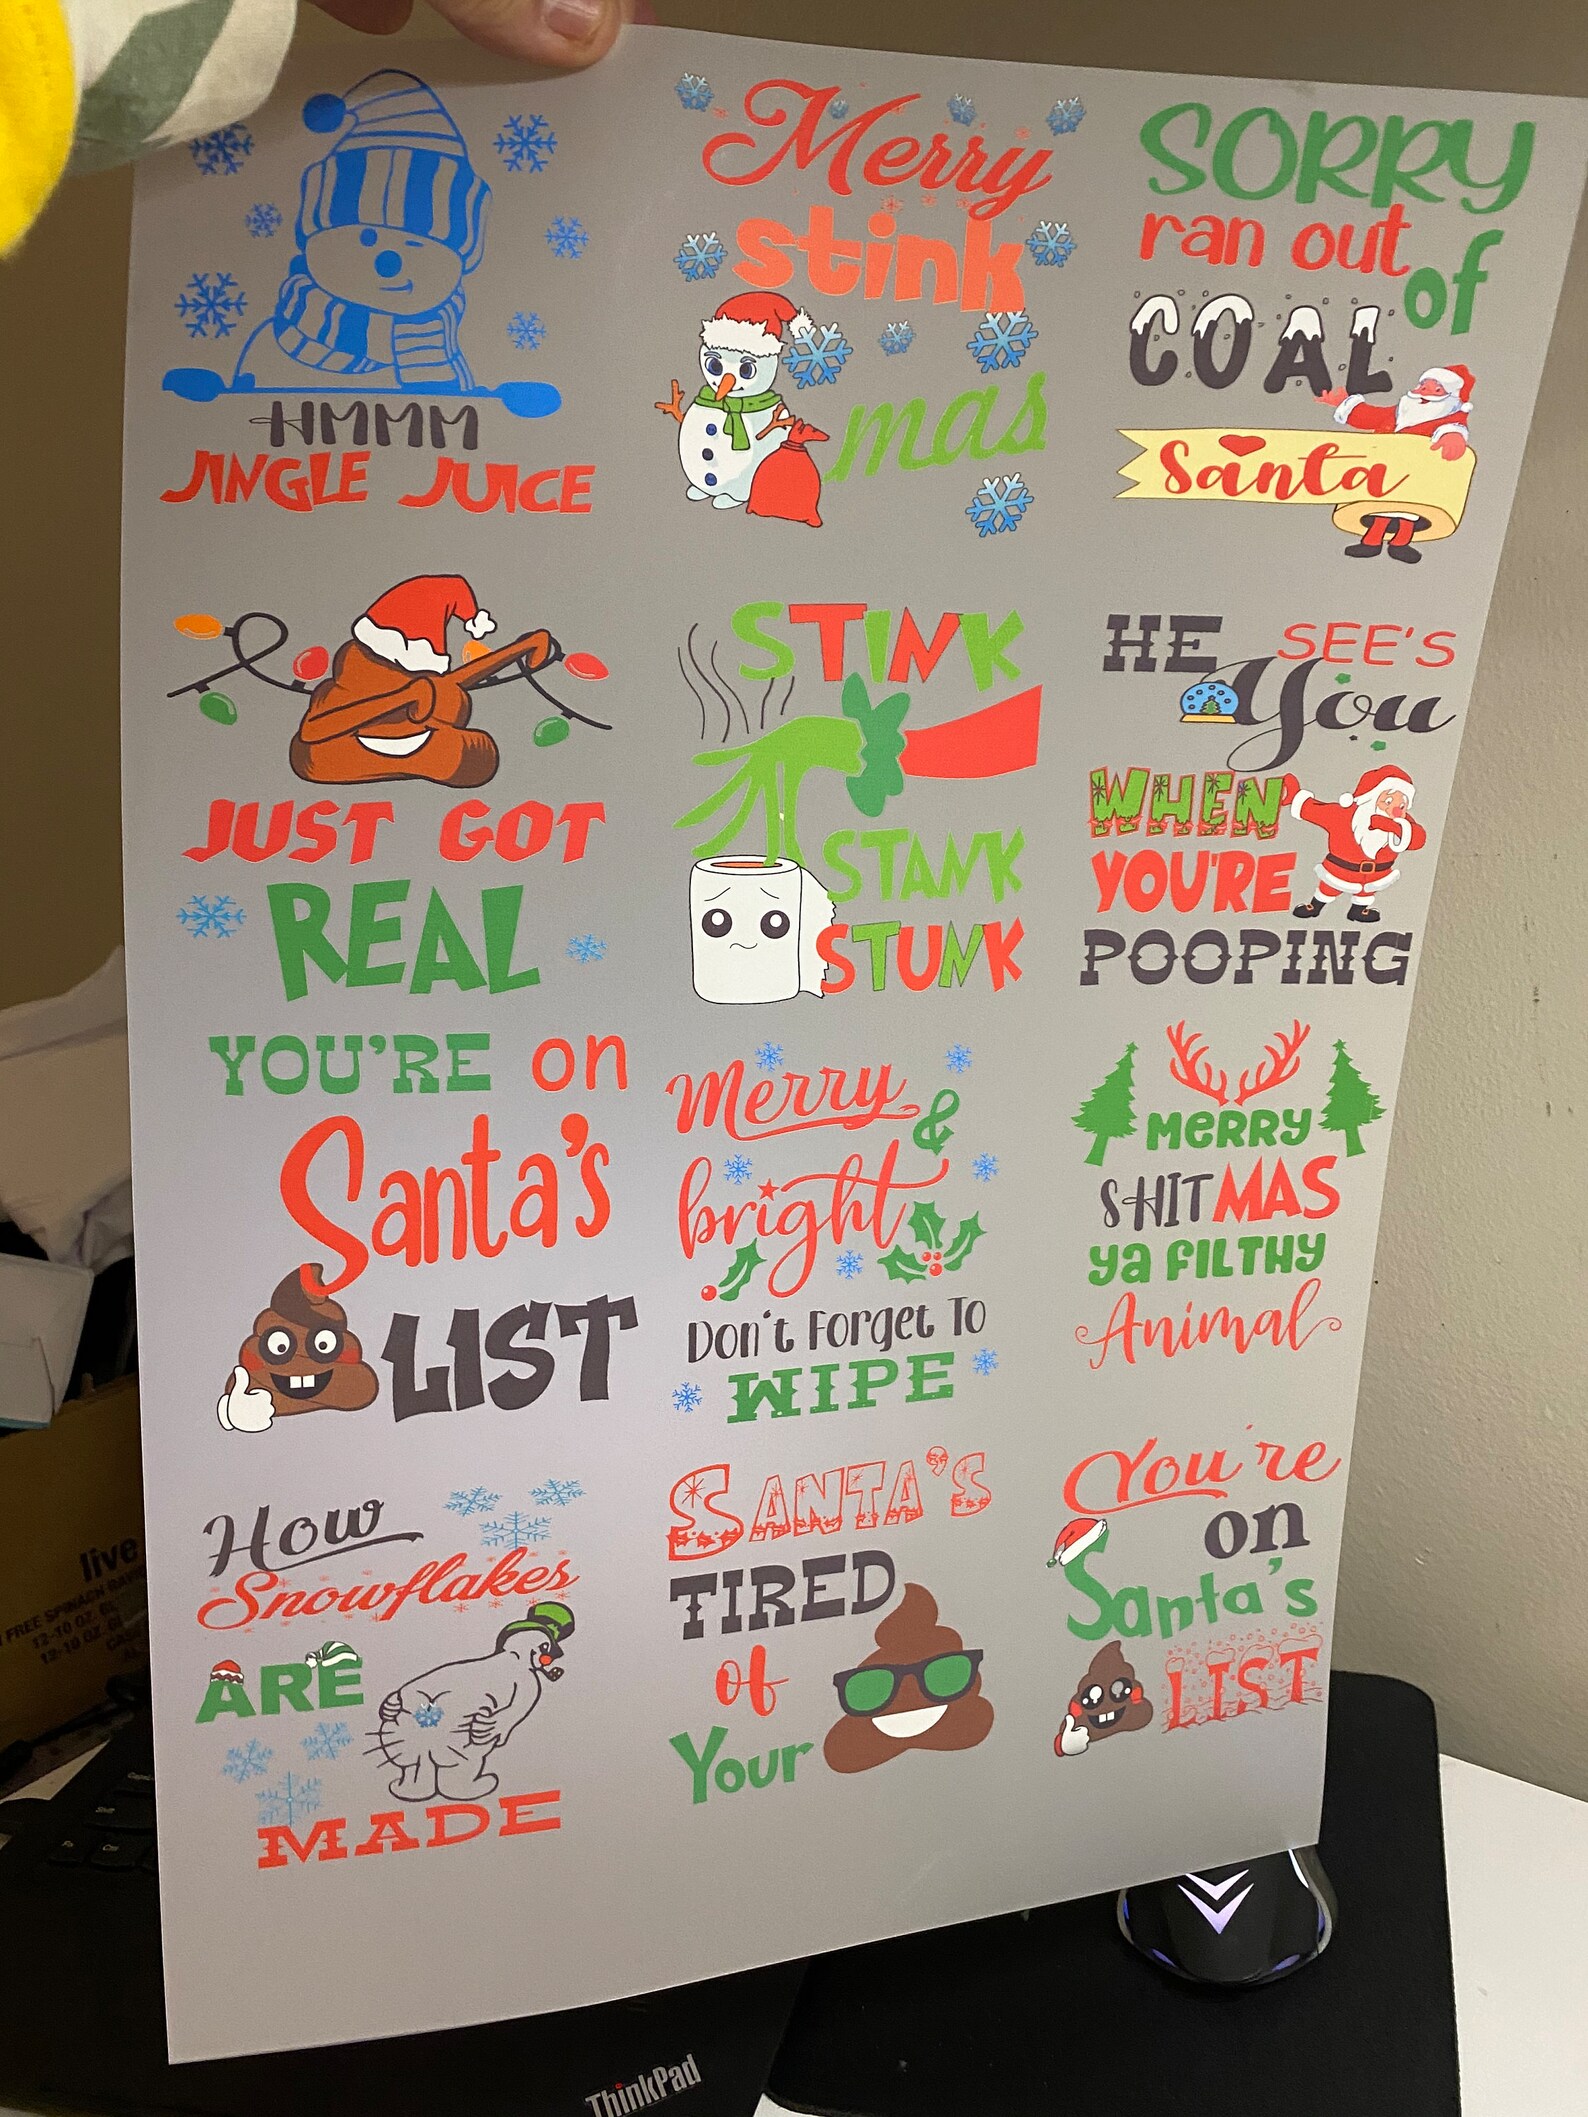 Nice stickers for funny Christmas.